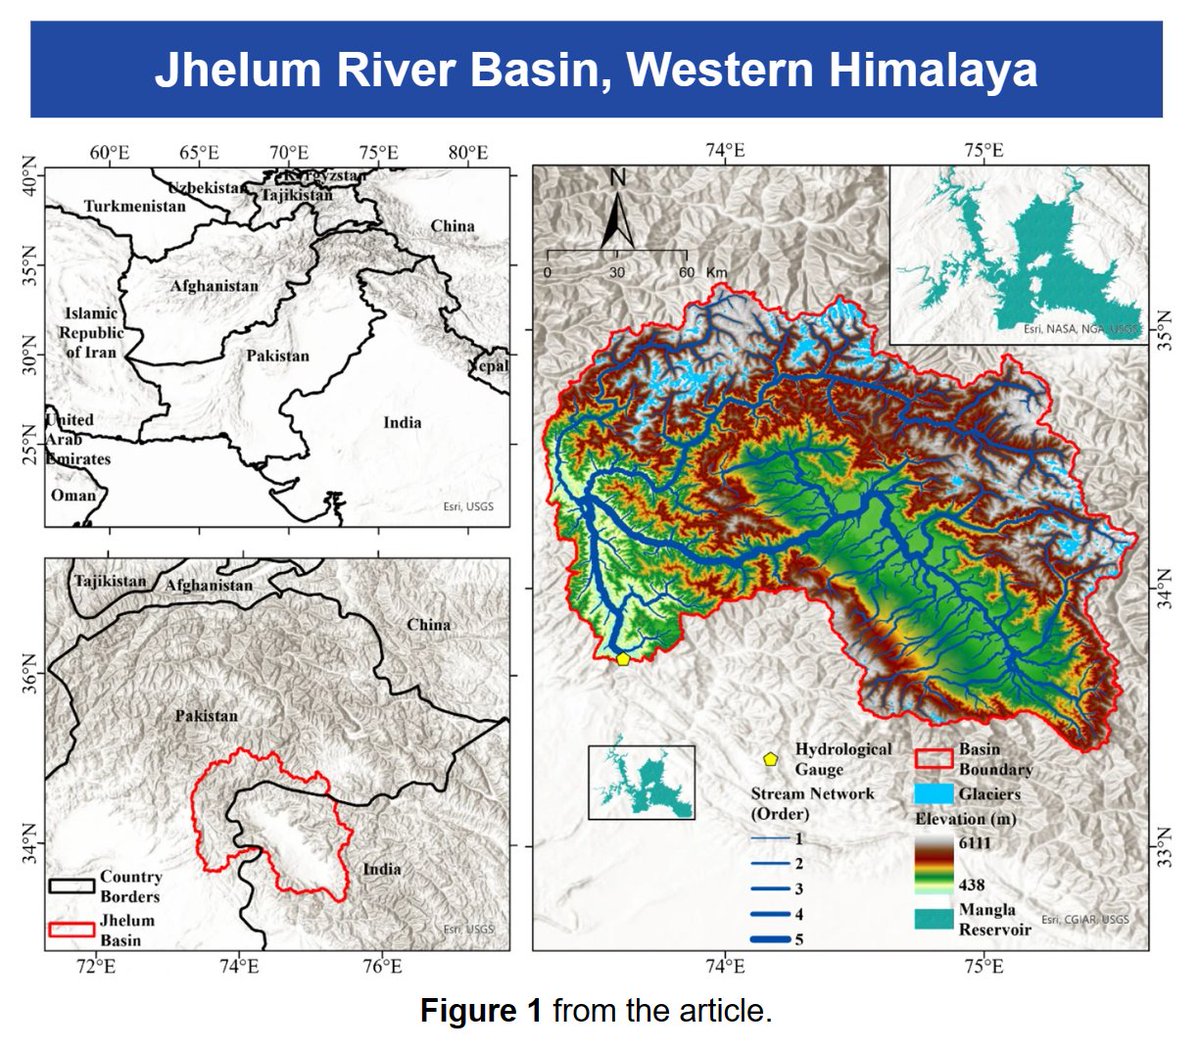 Streamflow changes in the Jhelum River basin from 1901 to 2019 were simulated and analyzed for their relationship to climate change. It is expected that monsoons will greatly disrupt the area’s hydrological regime in the future. doi.org/10.1007/s10584…